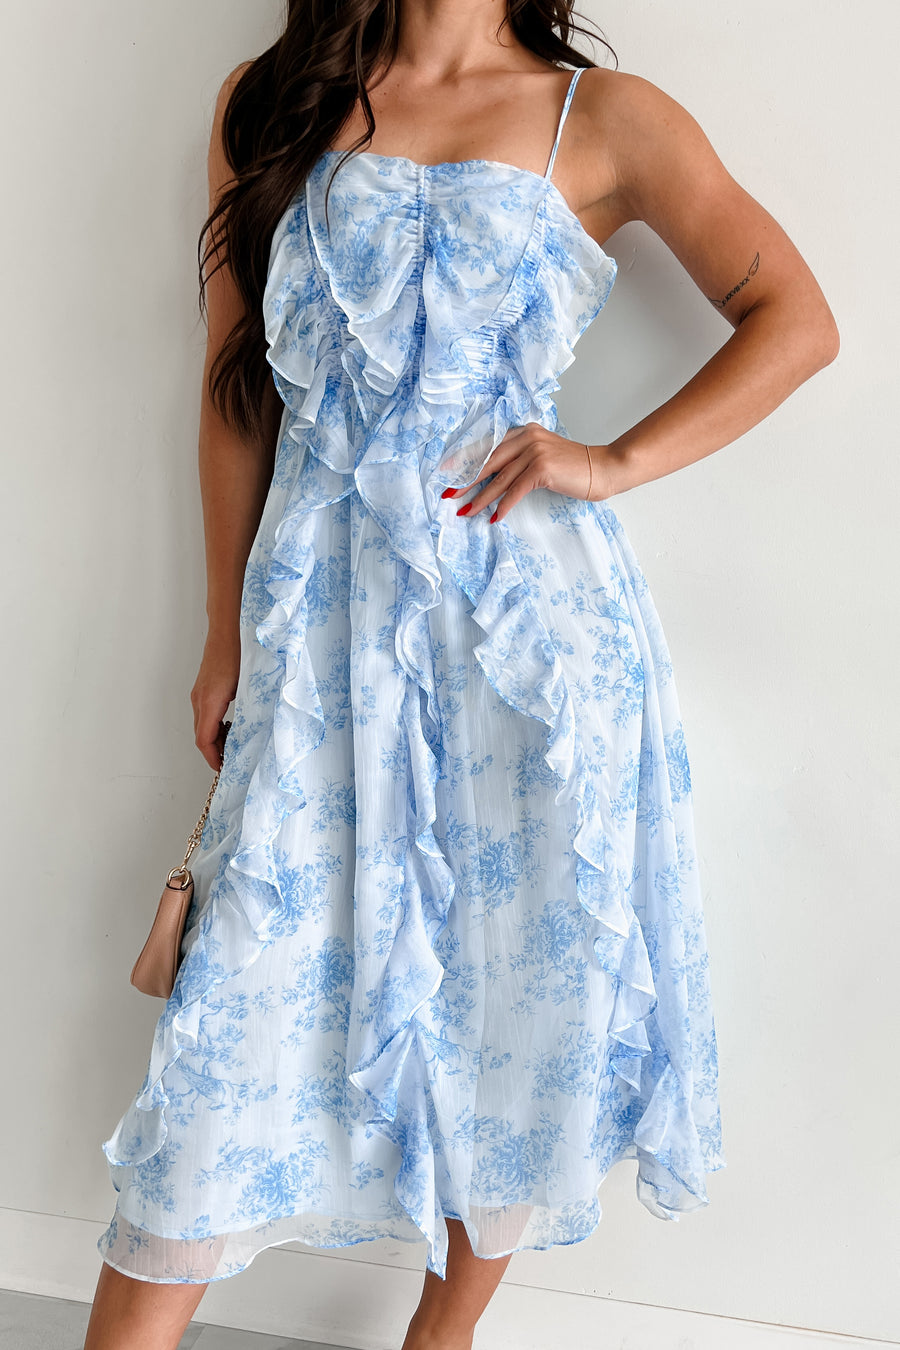 Profess Your Love Ruffle Floral Midi Dress (Blue Floral)